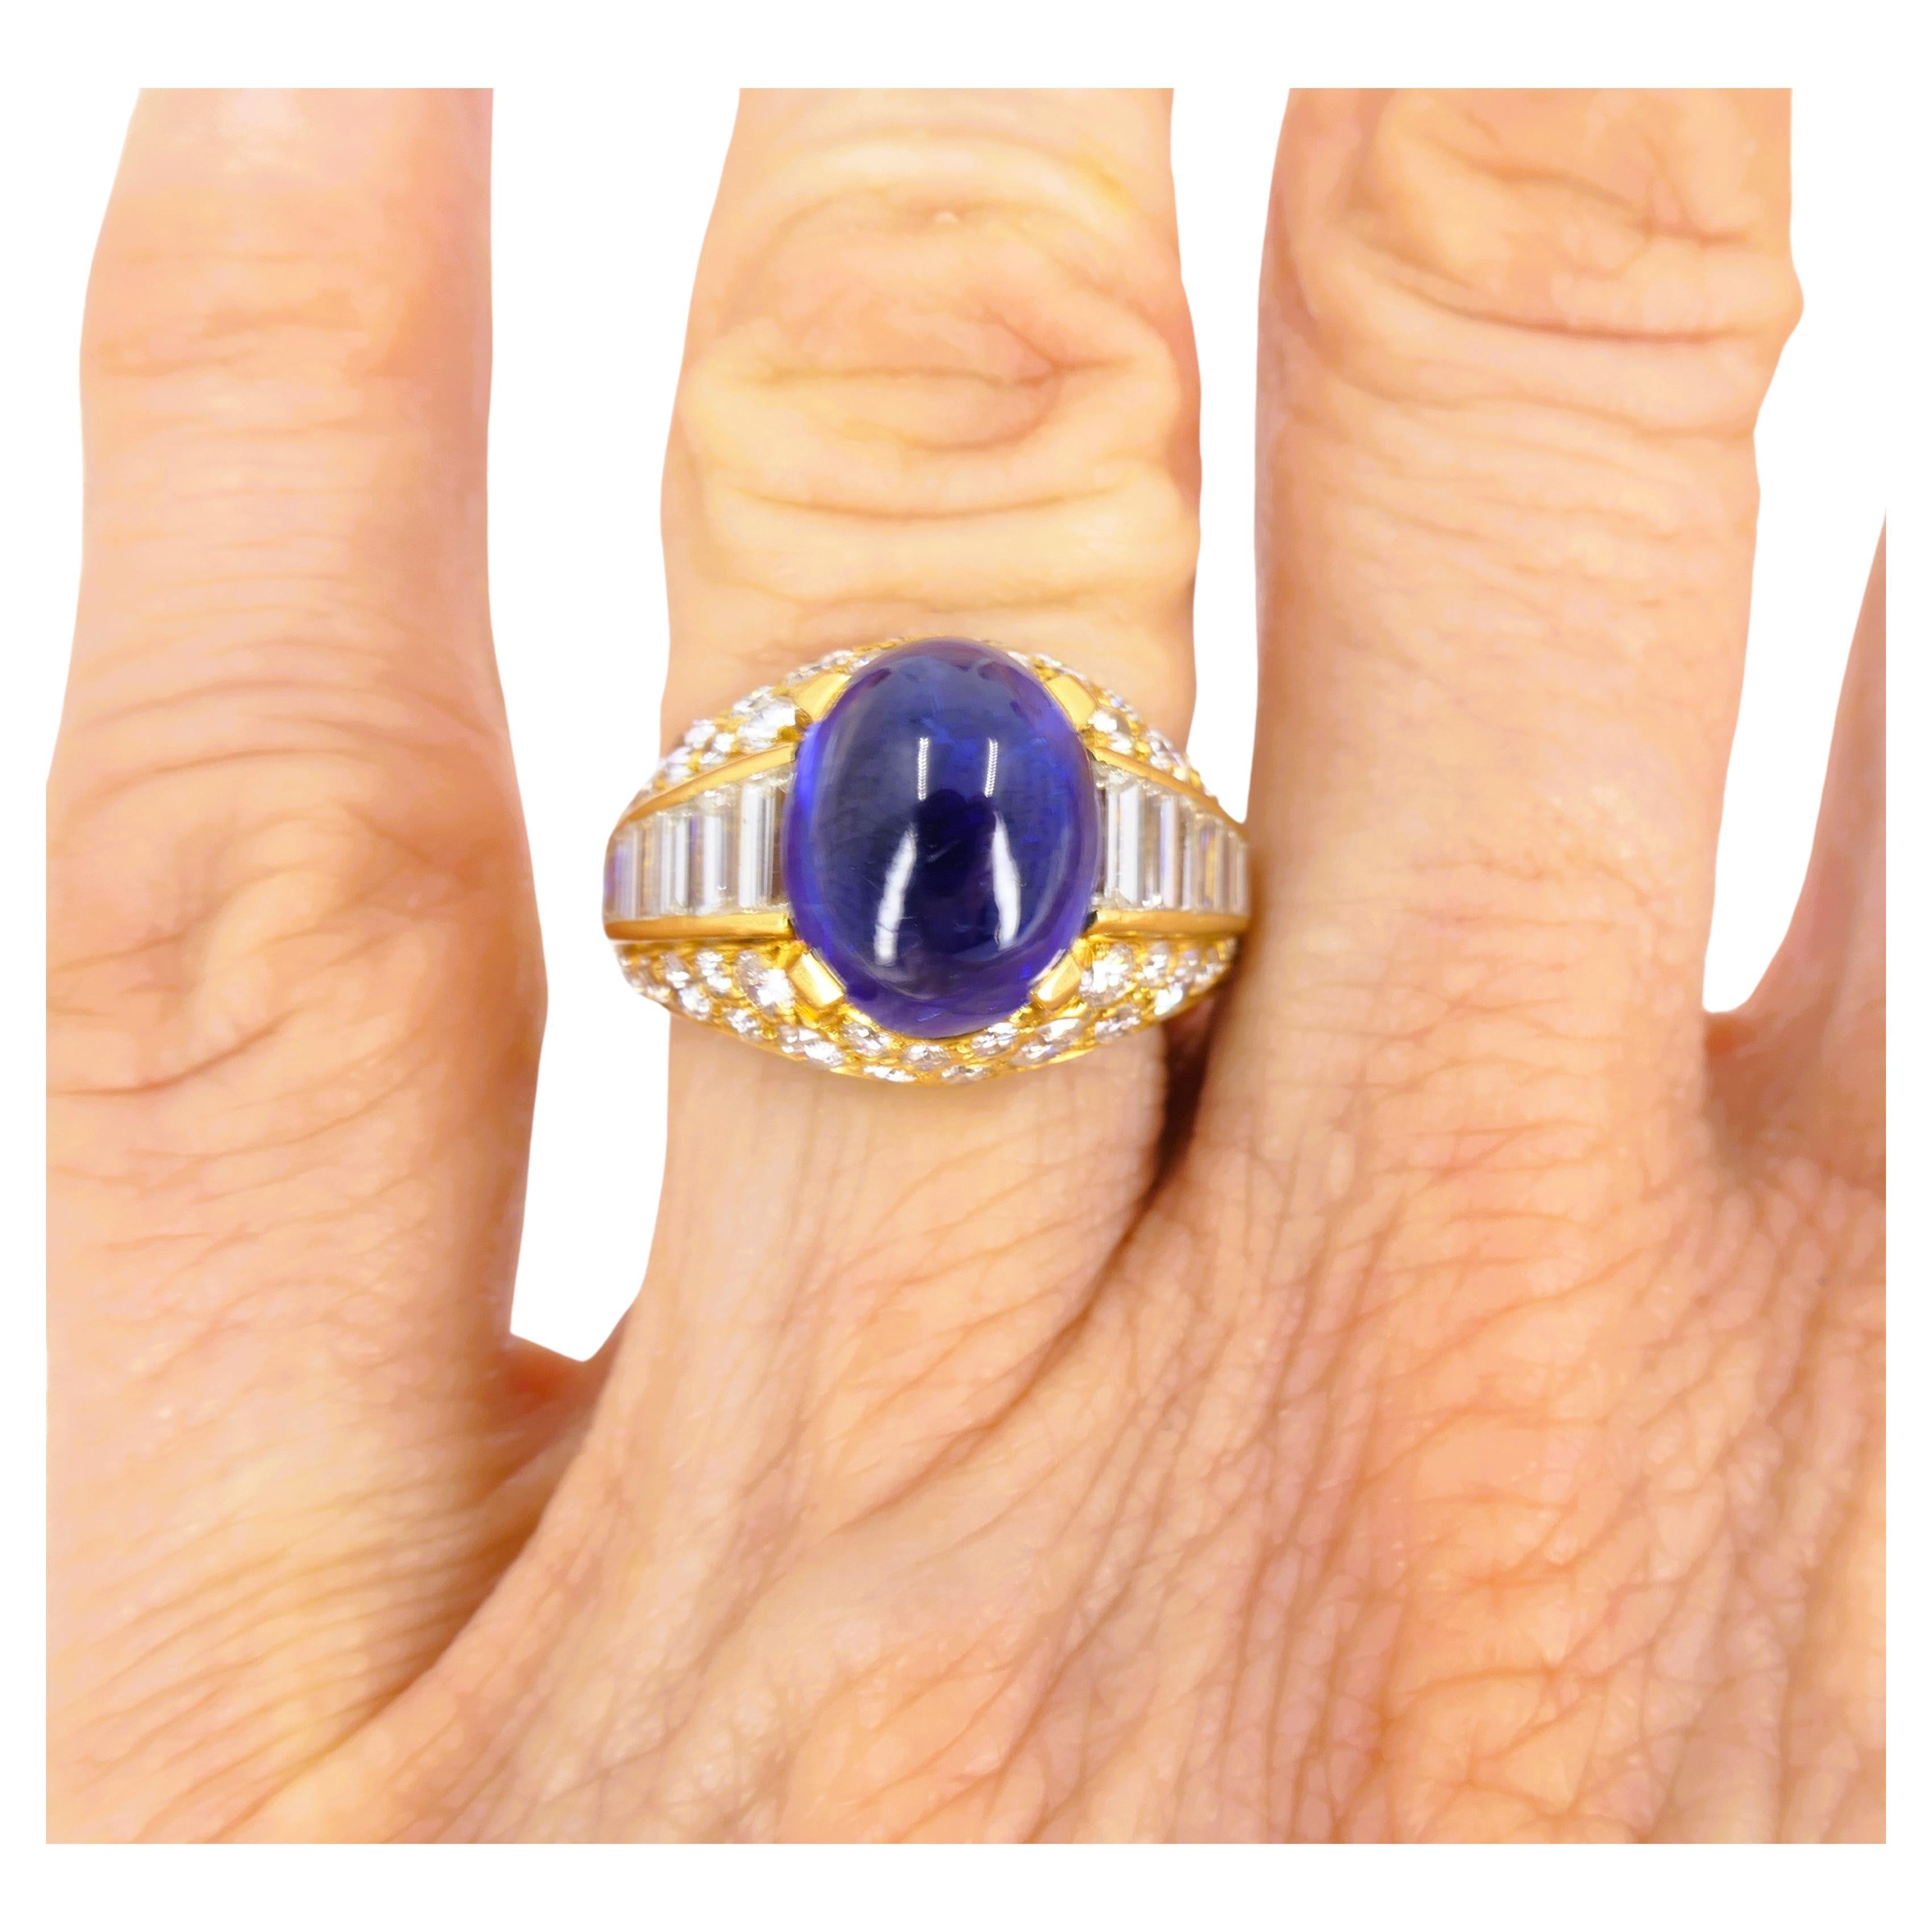 An iconic Bulgari Trombino ring made of 18k gold, featuring sapphire and diamond. 
The Trombino ring is one of the most recognizable among Bulgari’s designs. The name derives from the Italian word for 